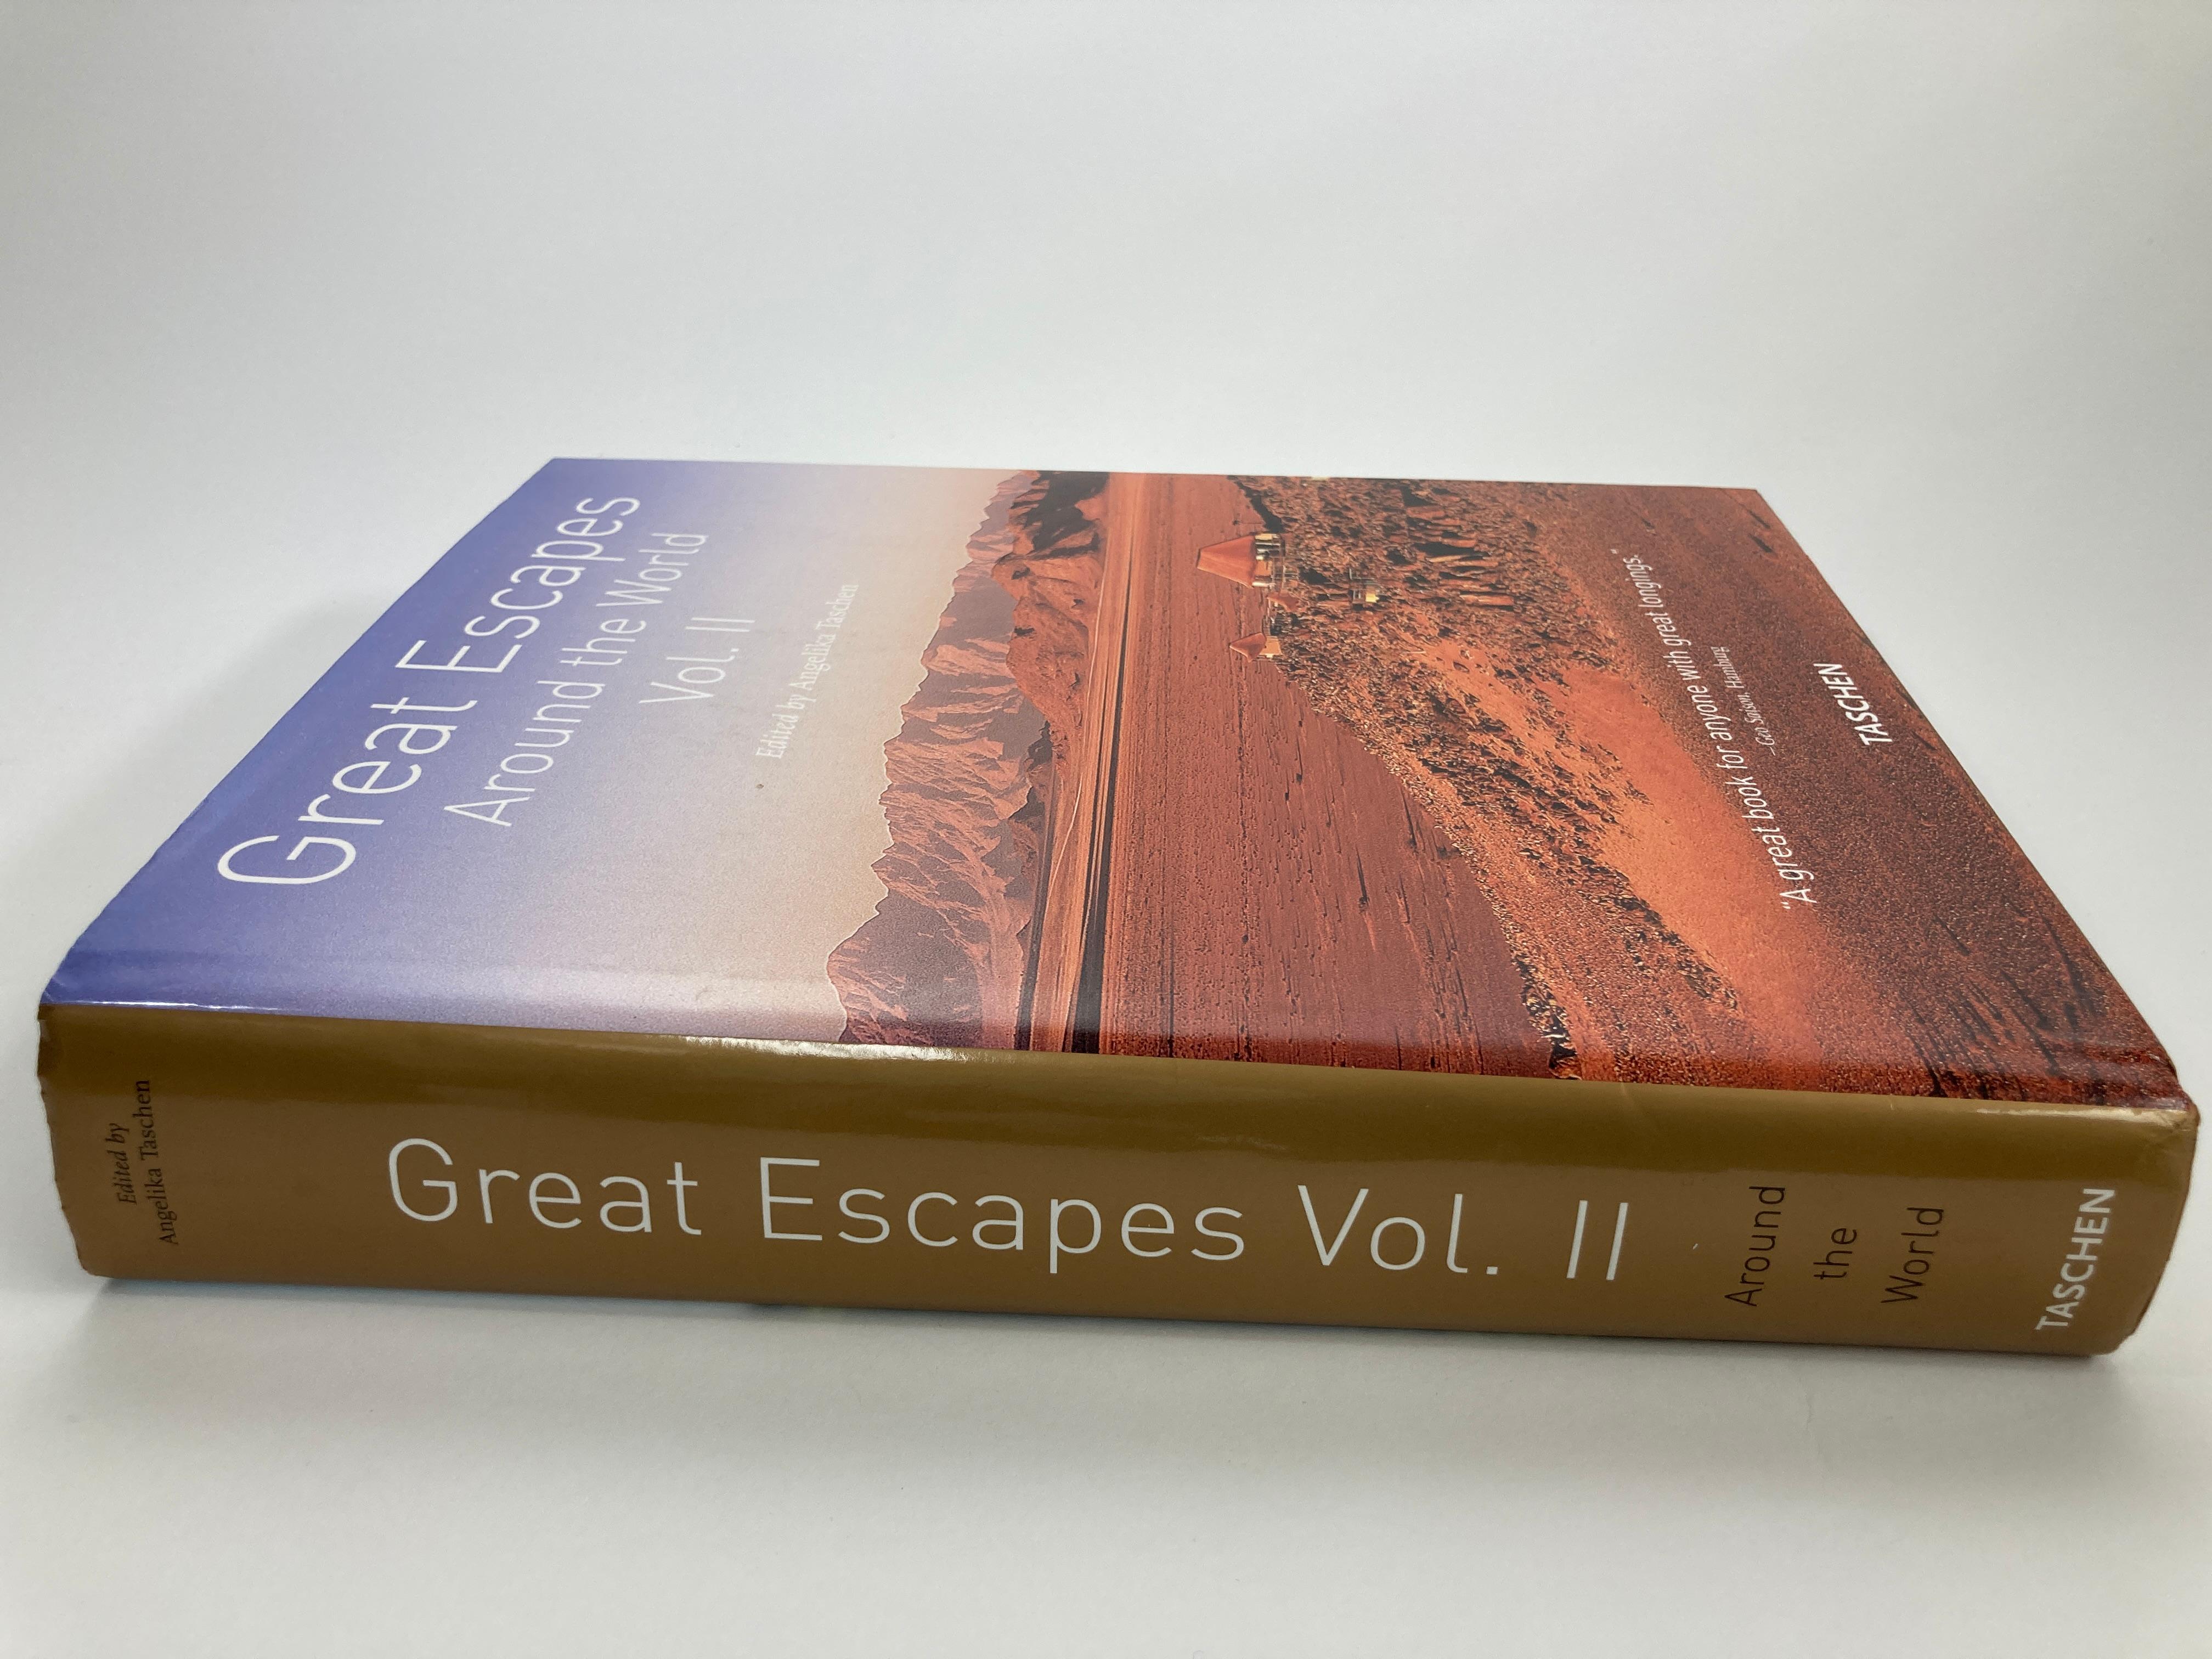 Paper Great Escapes Around the World Vol. 2 by Taschen Hardcover Large Book